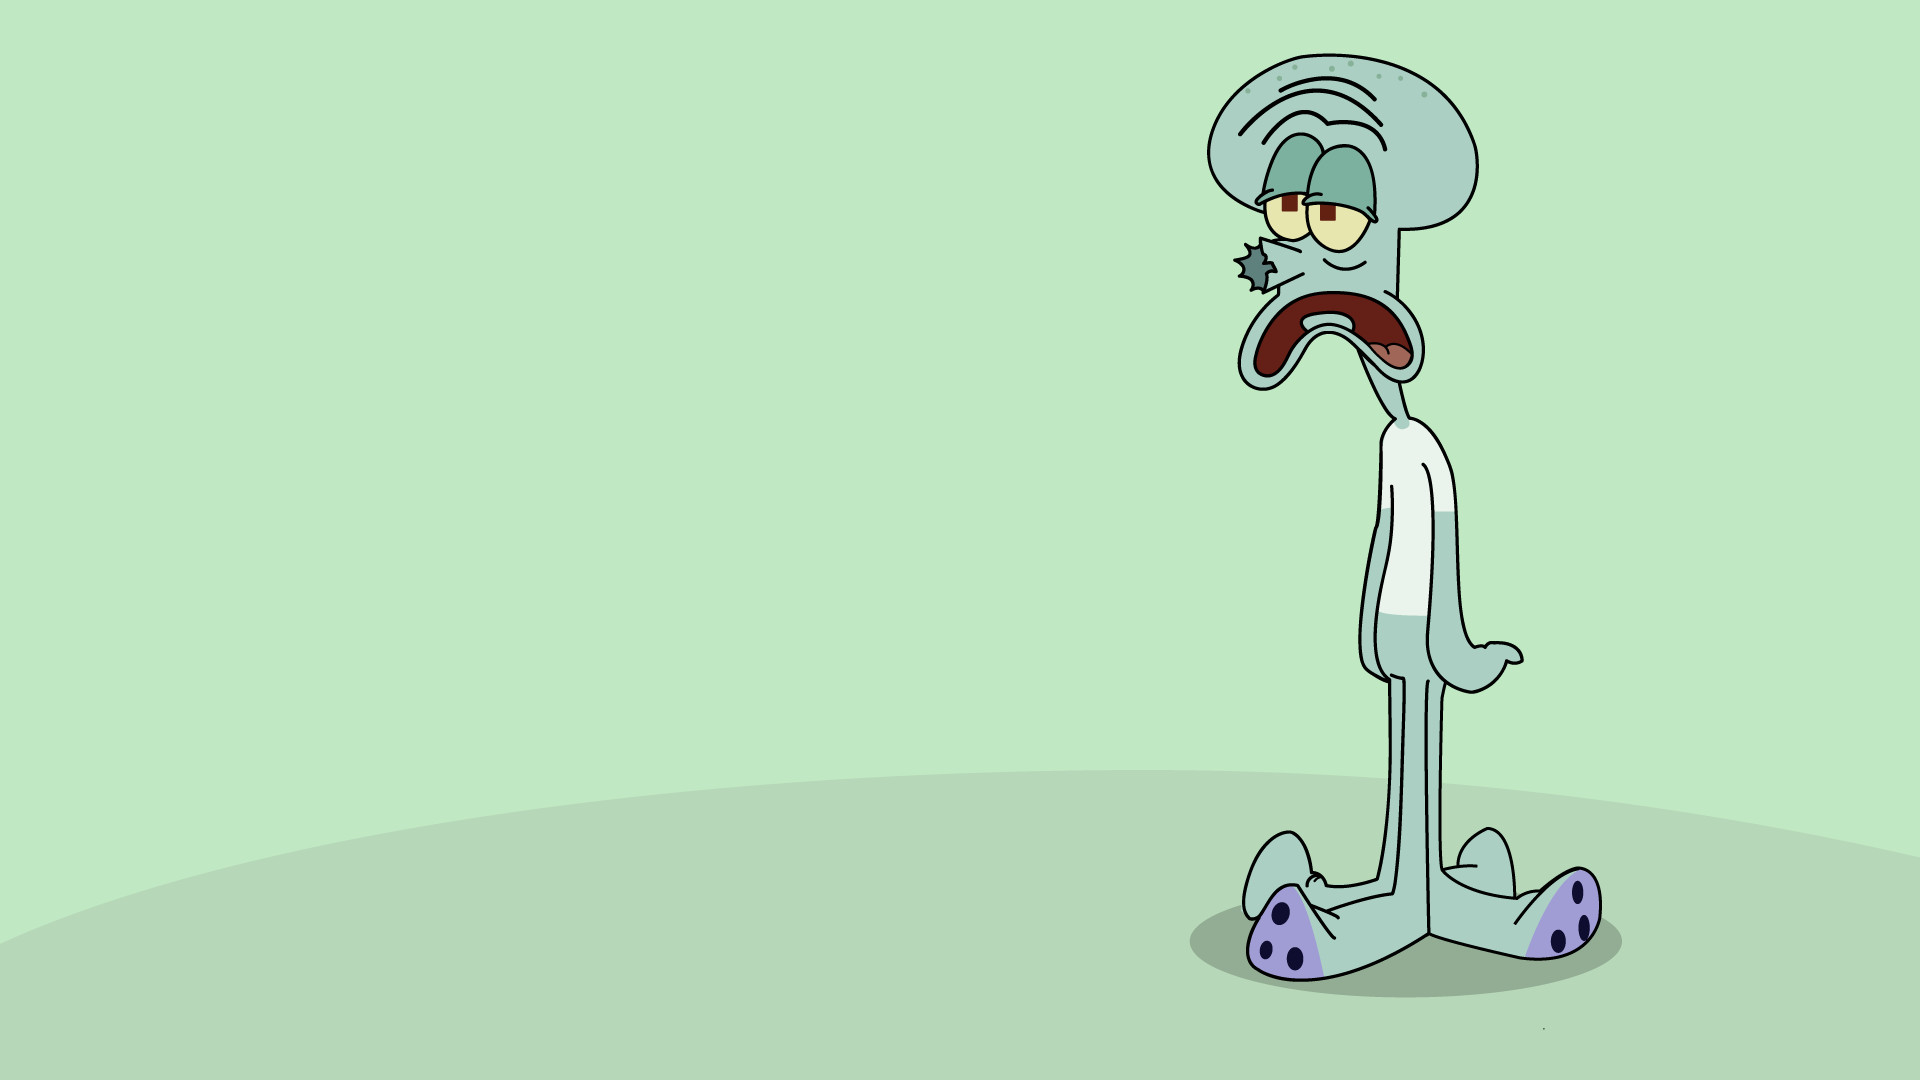 1920x1080 I made this Squidward wallpaper, what do you guys think?